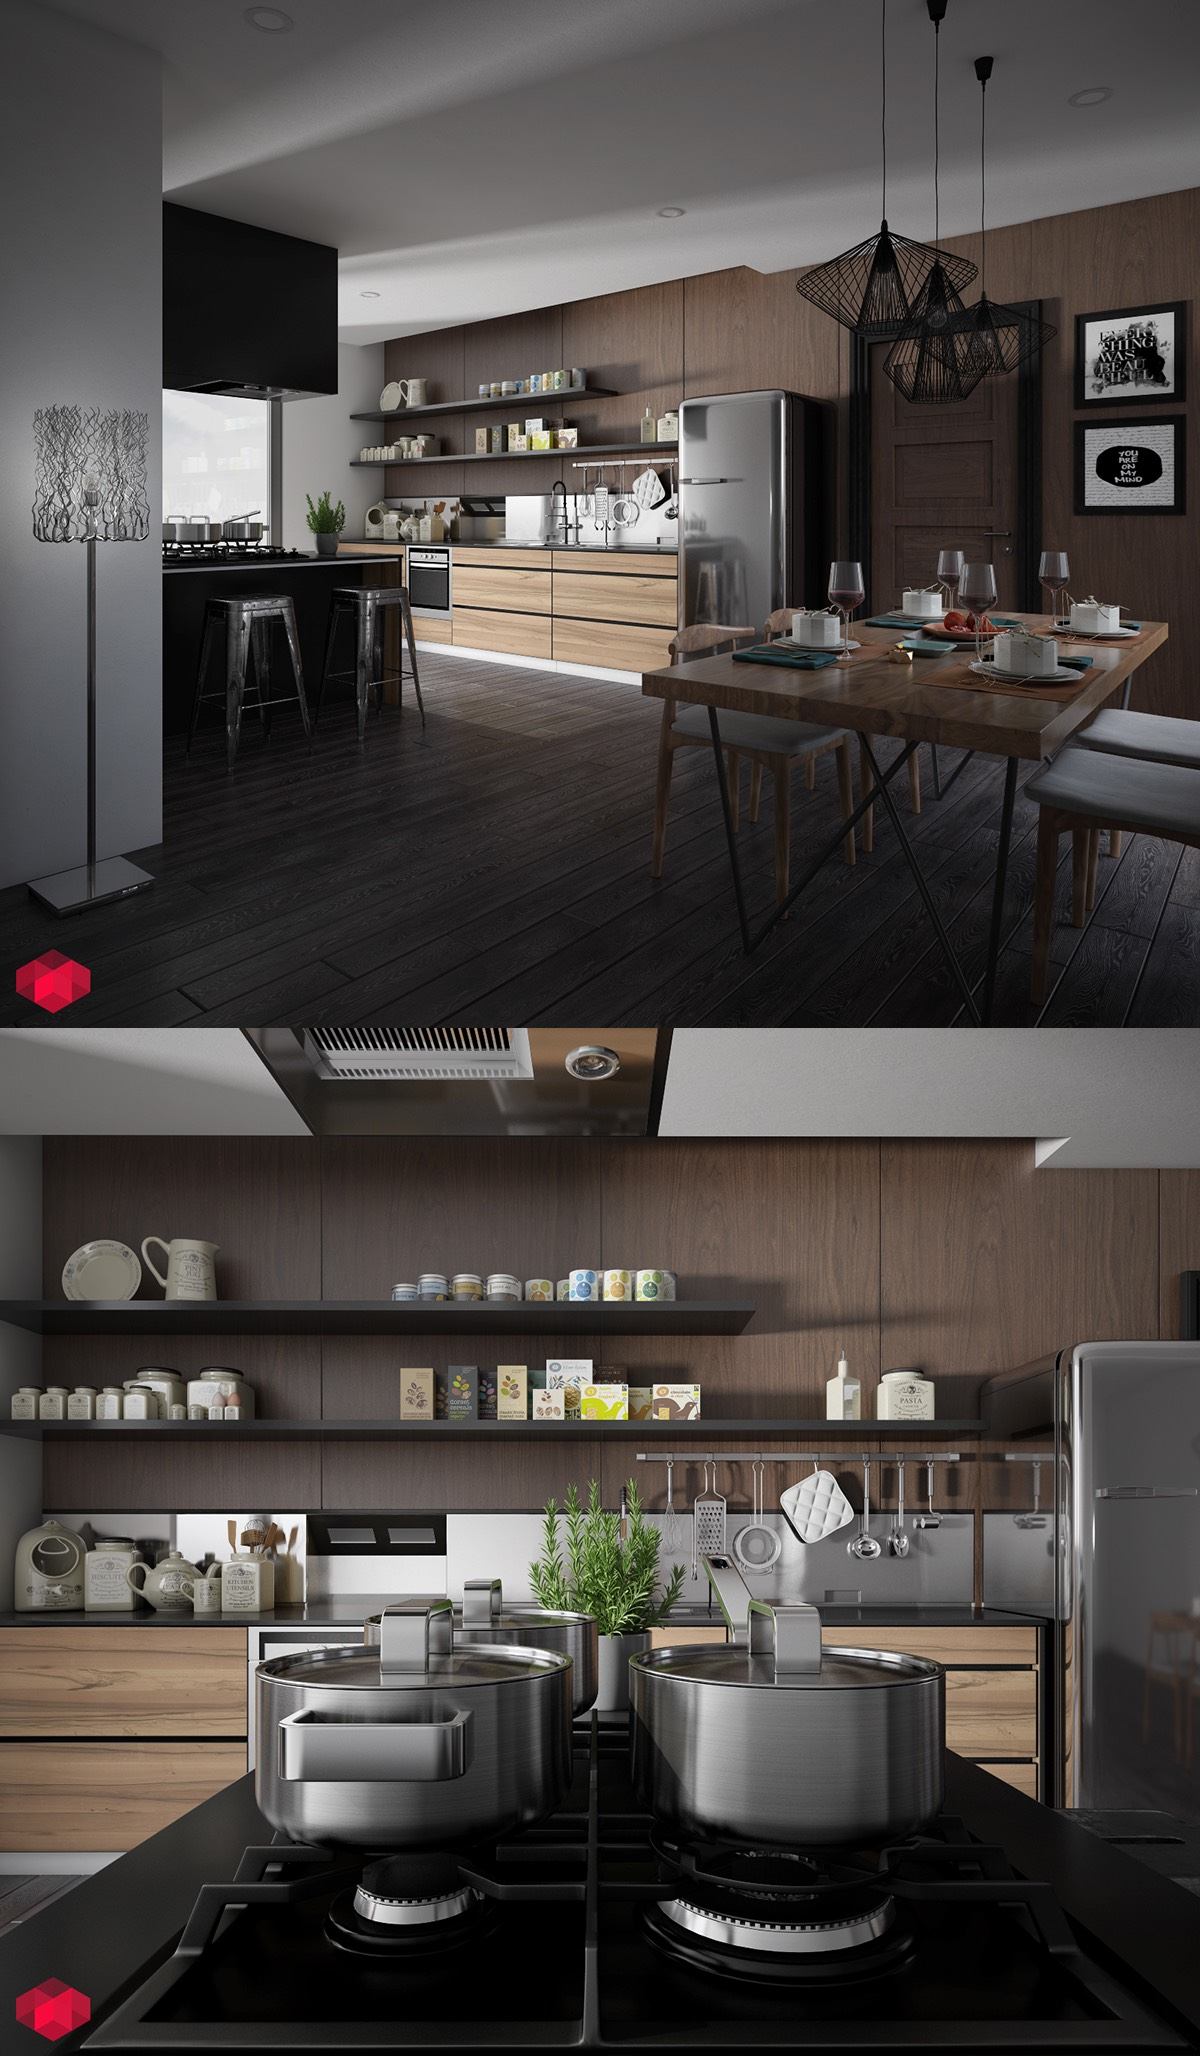 Modern kitchen made of white and wood "width =" 1200 "height =" 2056 "srcset =" https://mileray.com/wp-content/uploads/2016/05/unique-white-kitchen-with-dark-wood- 1 .jpg 1200w, https://mileray.com/wp-content/uploads/2016/05/unique-white-kitchen-with-dark-wood-1-175x300.jpg 175w, https://mileray.com/ wp -content / uploads / 2016/05 / unique-white-kitchen-with-dark-wood-1-768x1316.jpg 768w, https://mileray.com/wp-content/uploads/2016/05/unique-white - Kitchen-with-dark-wood-1-598x1024.jpg 598w, https://mileray.com/wp-content/uploads/2016/05/unique-white-kitchen-with-dark-wood-1-696x1192. jpg 696w, https://mileray.com/wp-content/uploads/2016/05/unique-white-kitchen-with-dark-wood-1-1068x1830.jpg 1068w, https://mileray.com/wp- content /uploads/2016/05/unique-white-kitchen-with-dark-wood-1-245x420.jpg 245w "sizes =" (maximum width: 1200px) 100vw, 1200px